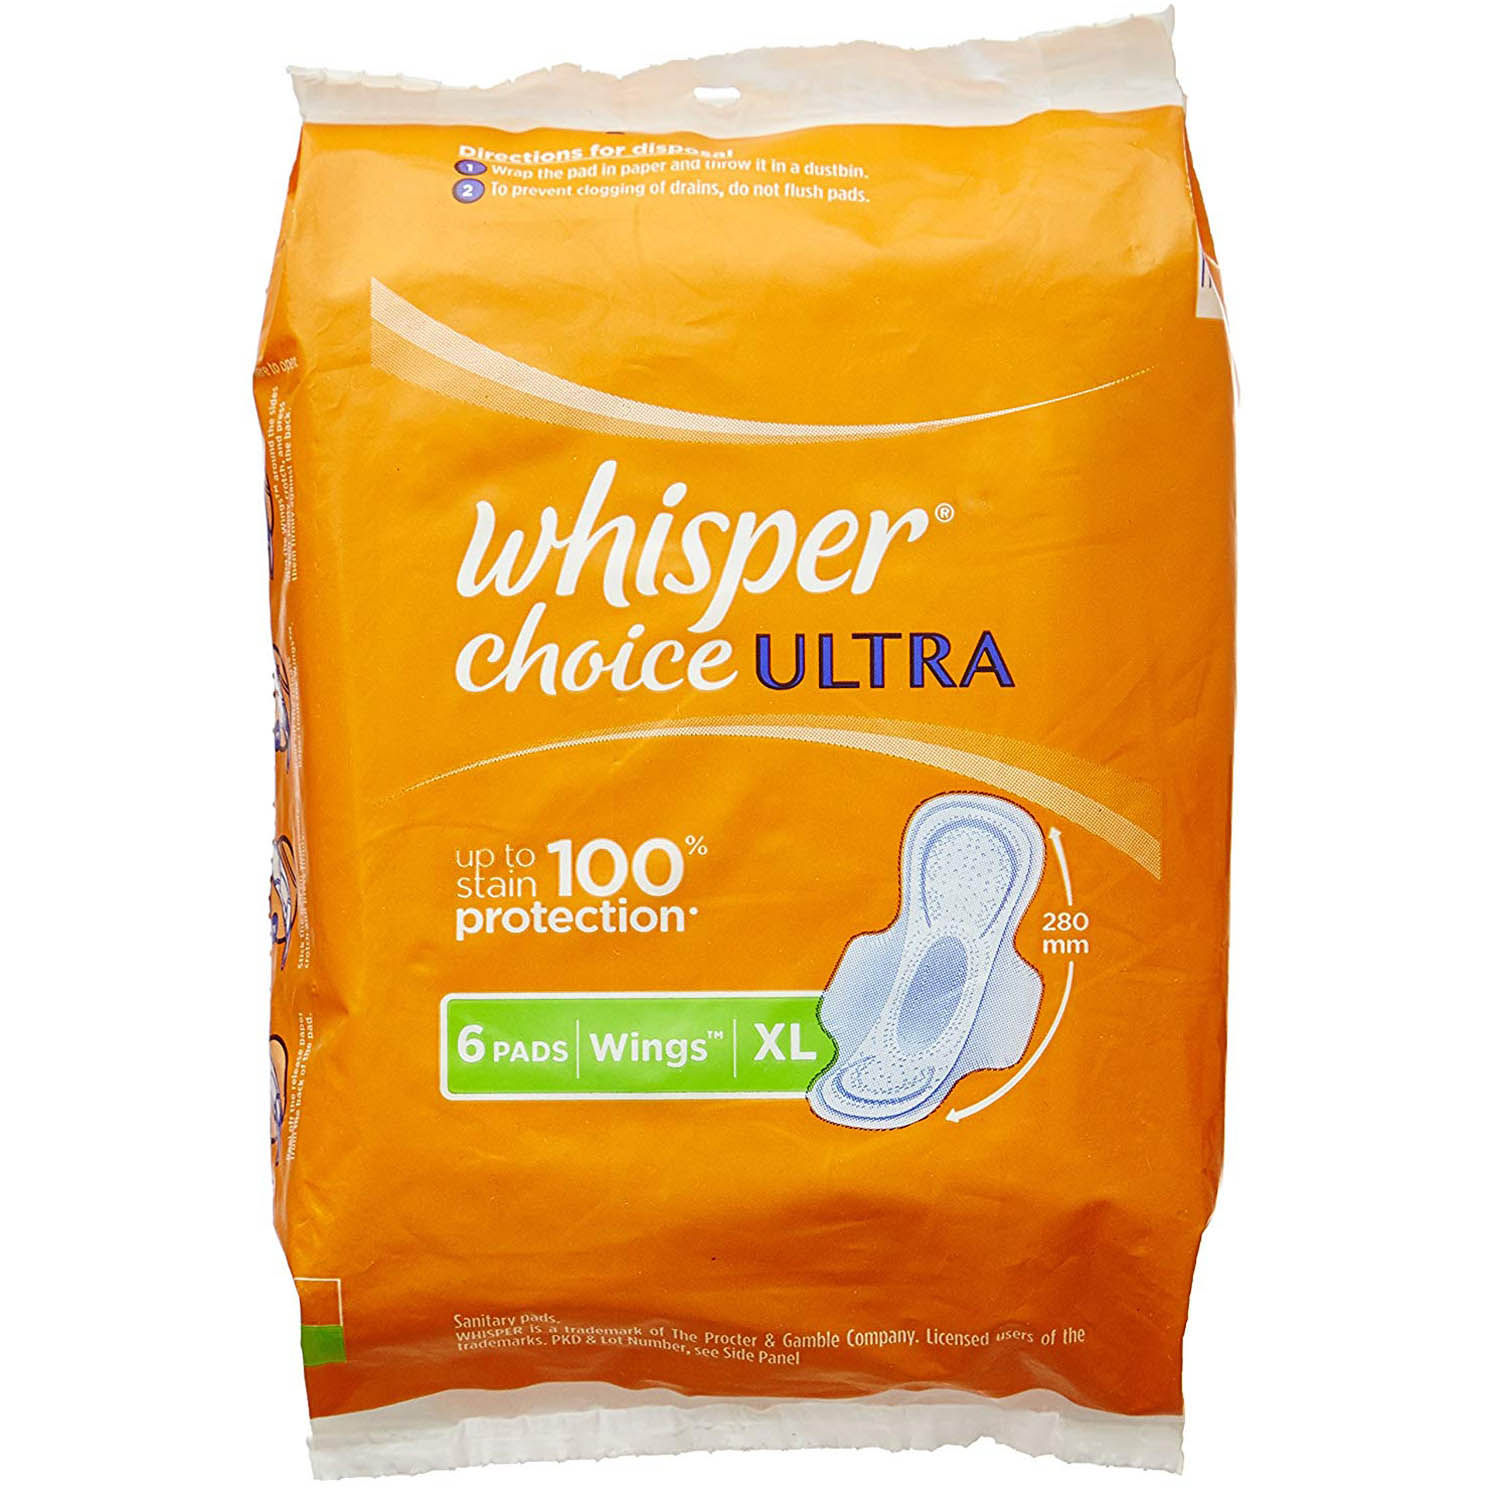 Whisper Choice Ultra Wings Sanitary Pads XL, 6 Count, Pack of 1 